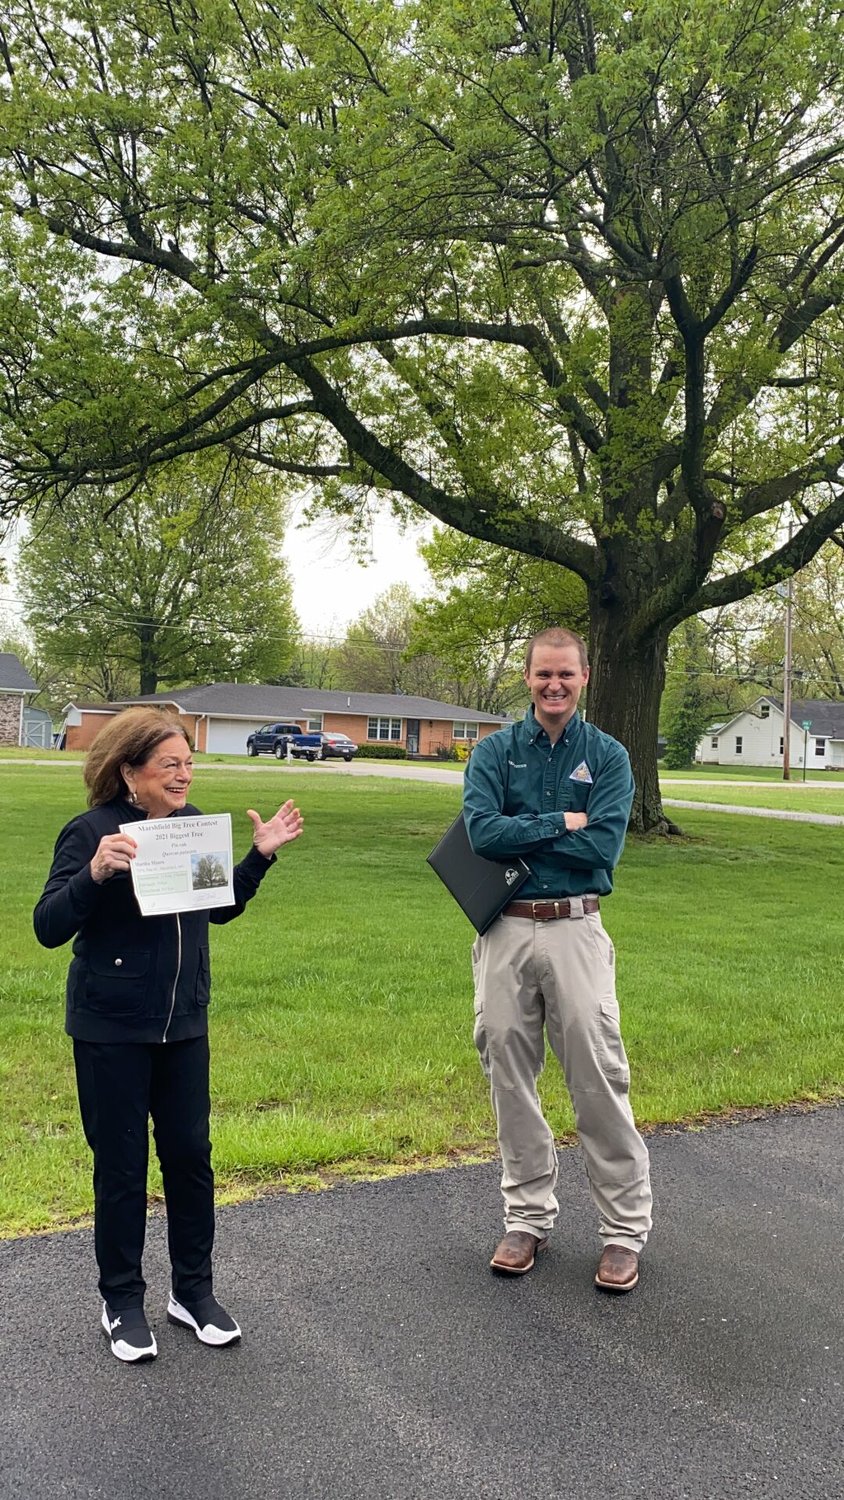 Martha Meyers proudly accepts the award certificate for submitting the largest tree in Marshfield, which happens to have its roots planted right in her front yard at Hubble and Pine.